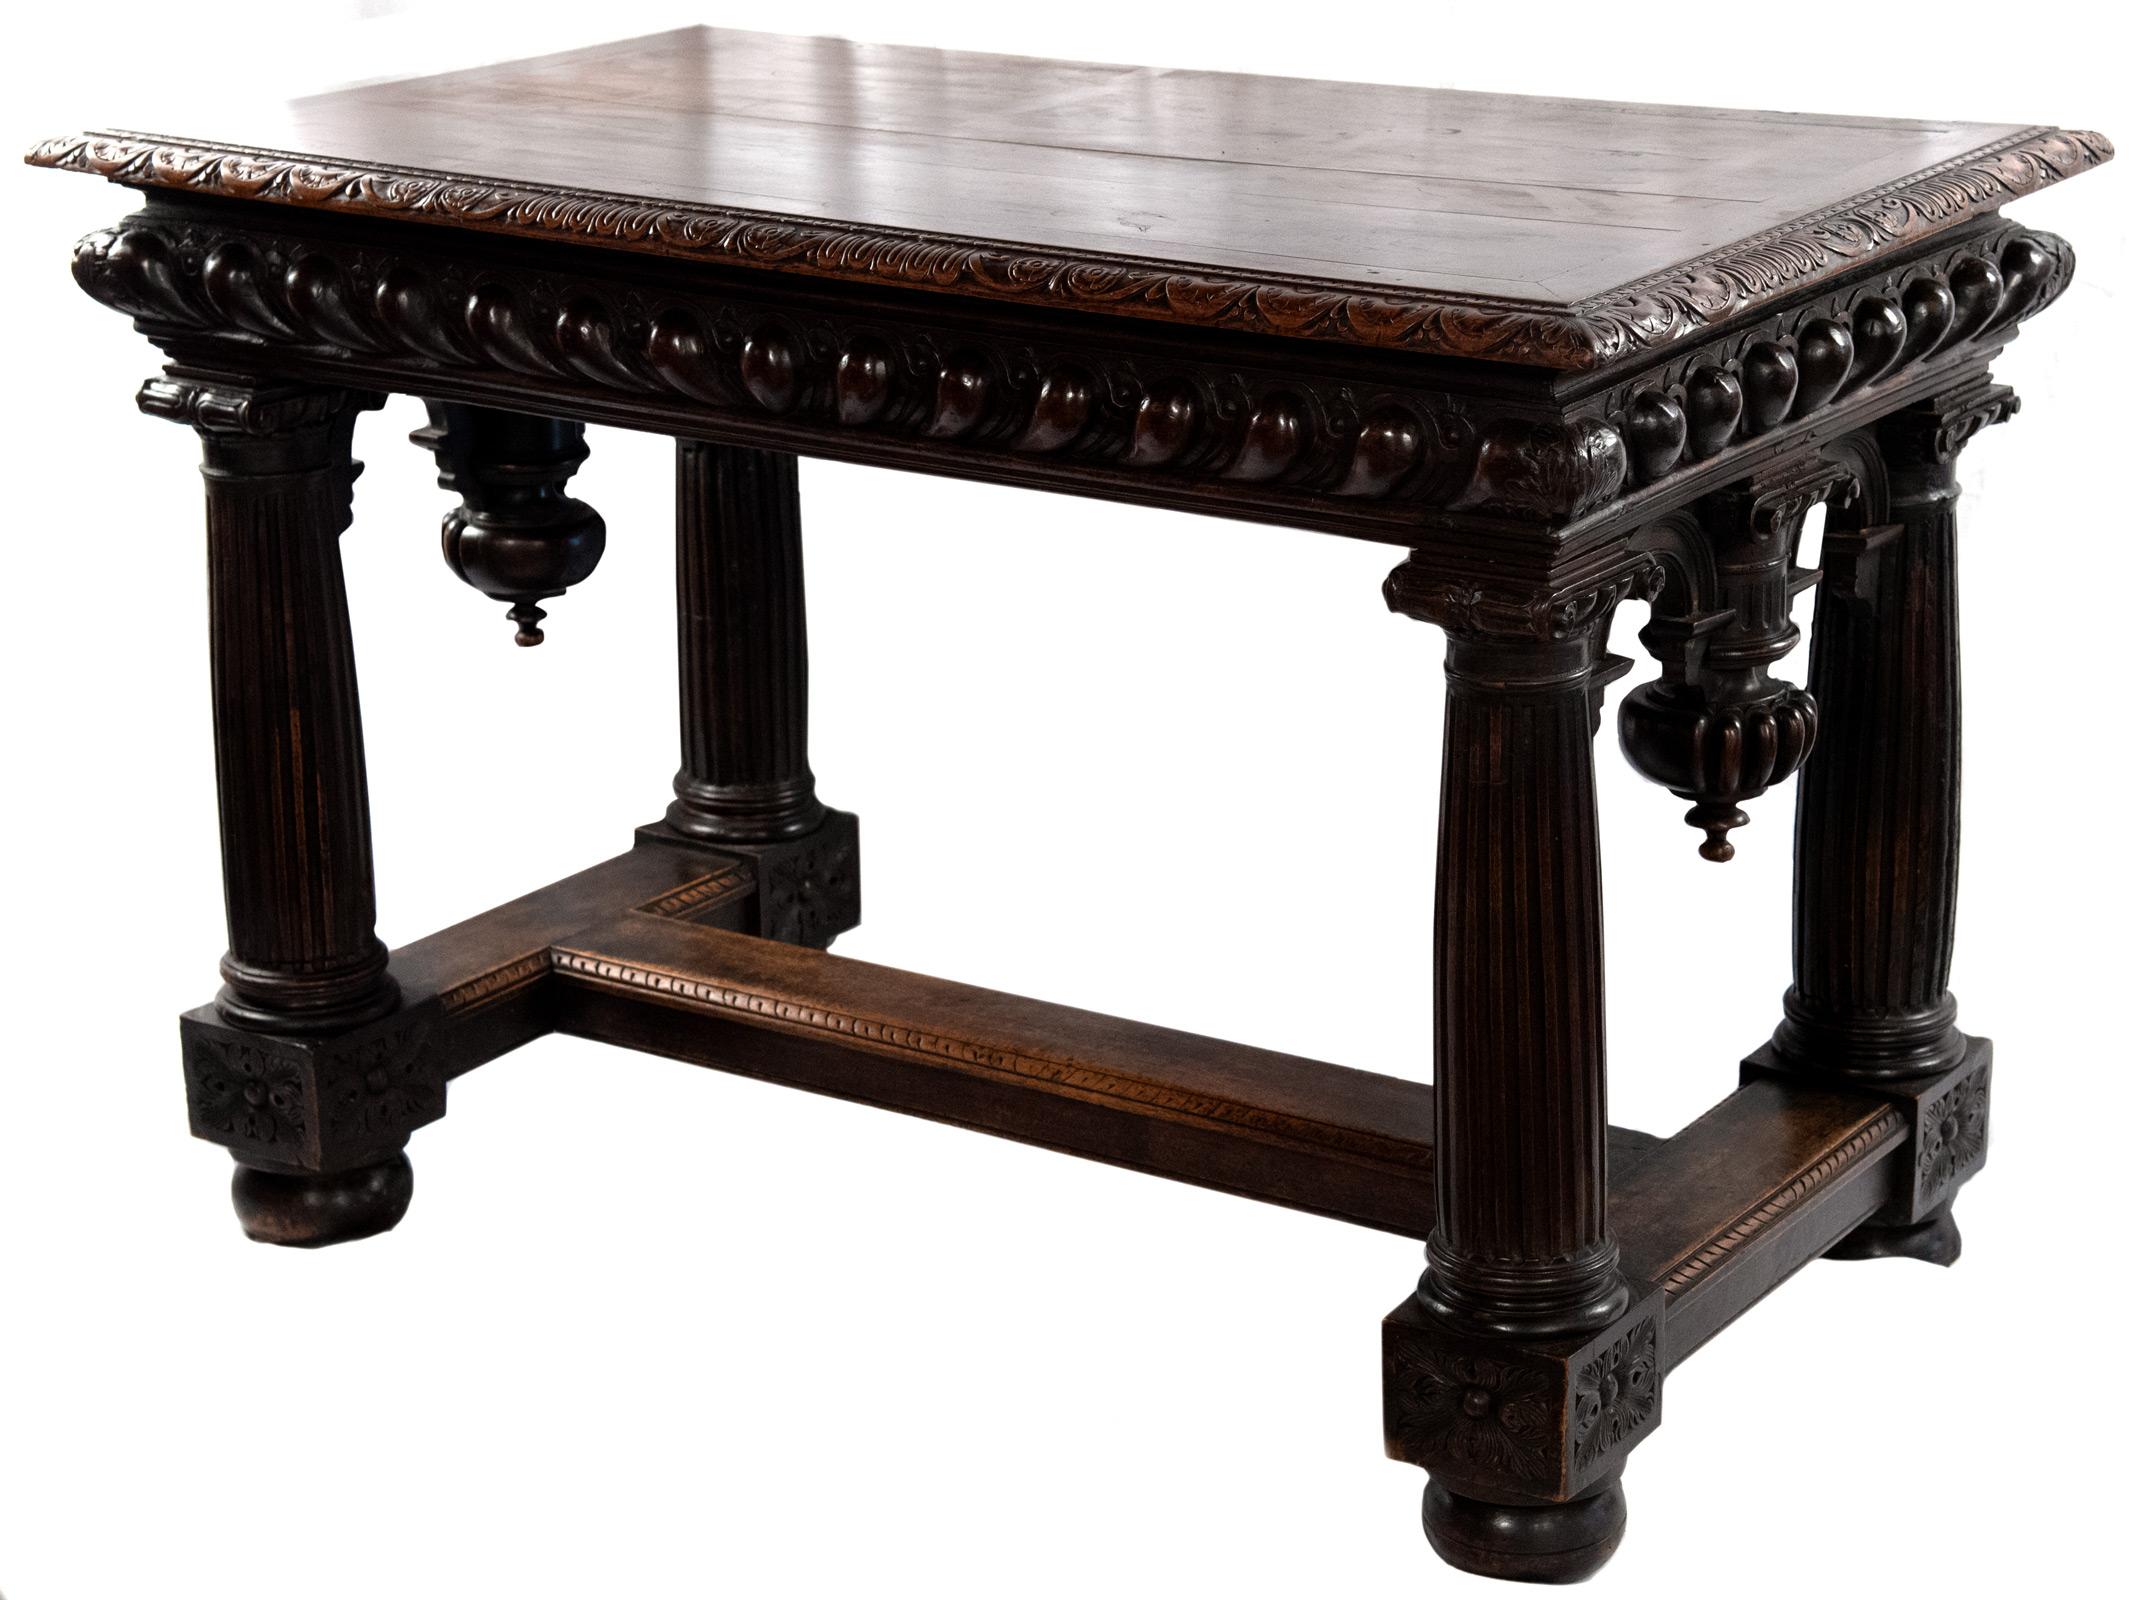 A period 17th century table.